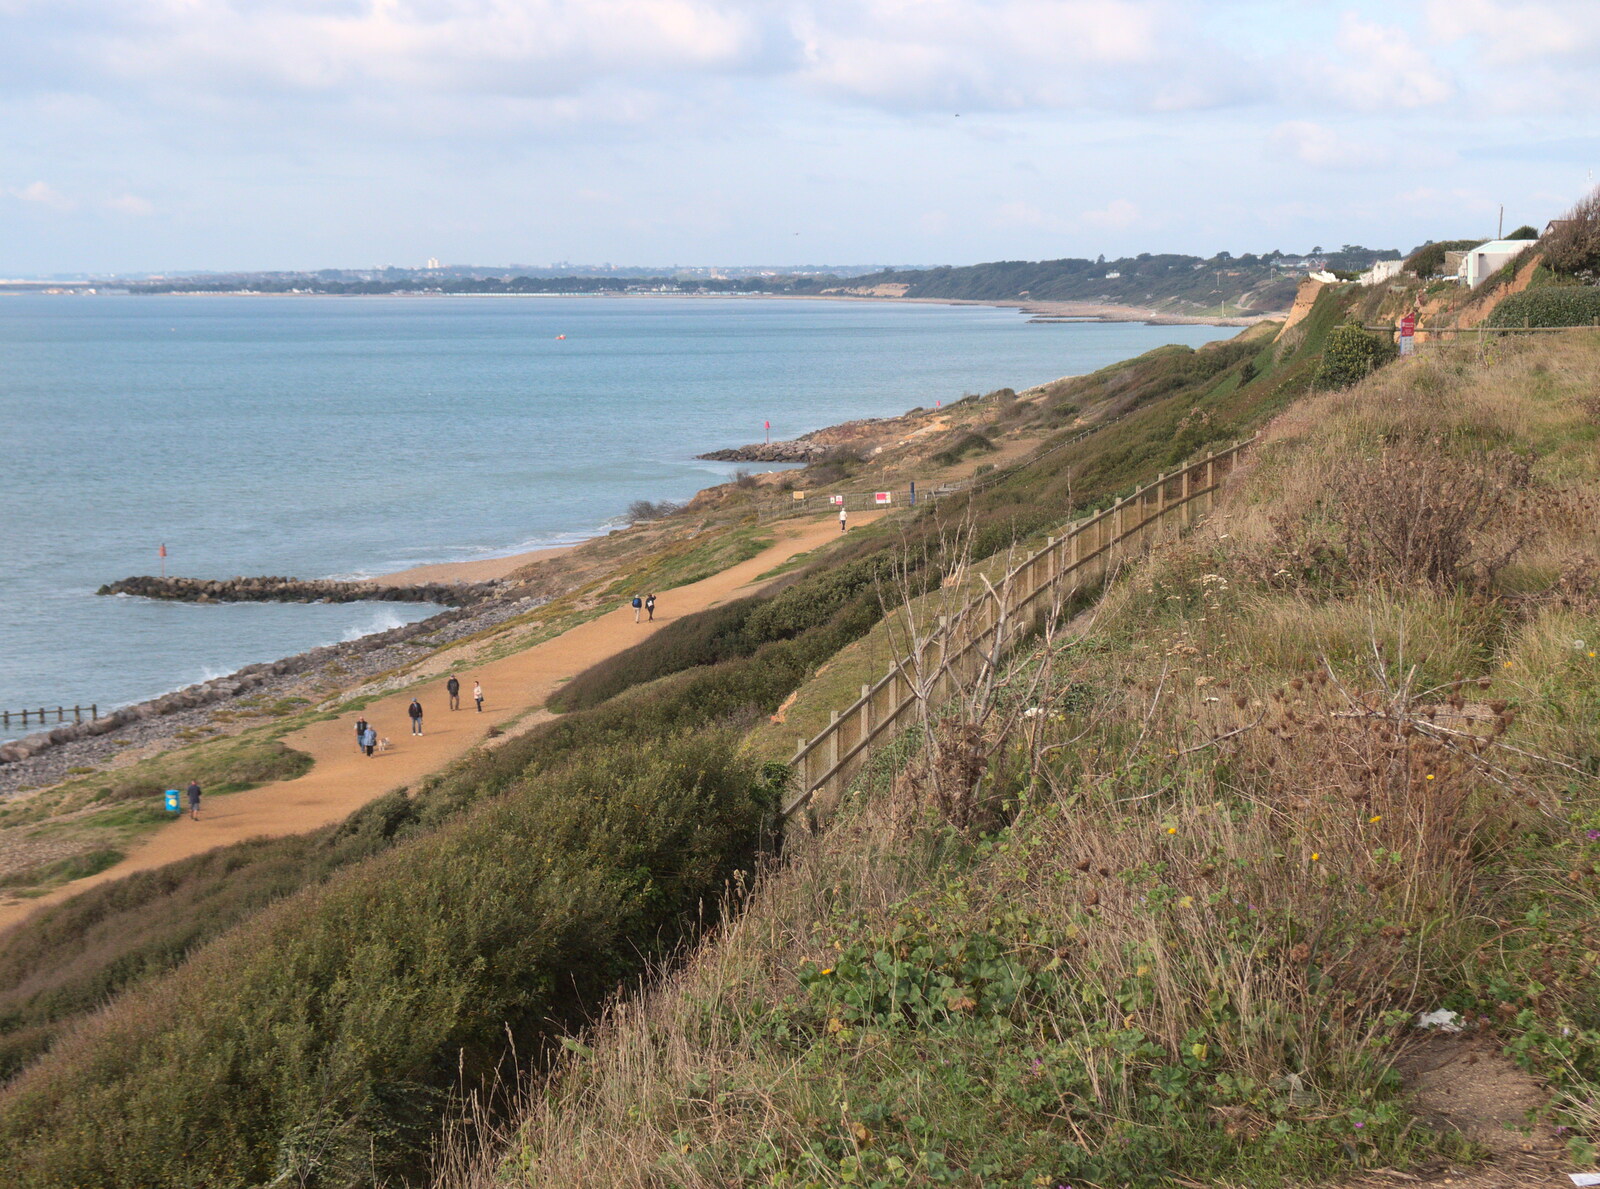 Barton cliff top, looking to Bournemouth from Grandmother's Wake, Winkton, Christchurch, Dorset - 18th September 2017